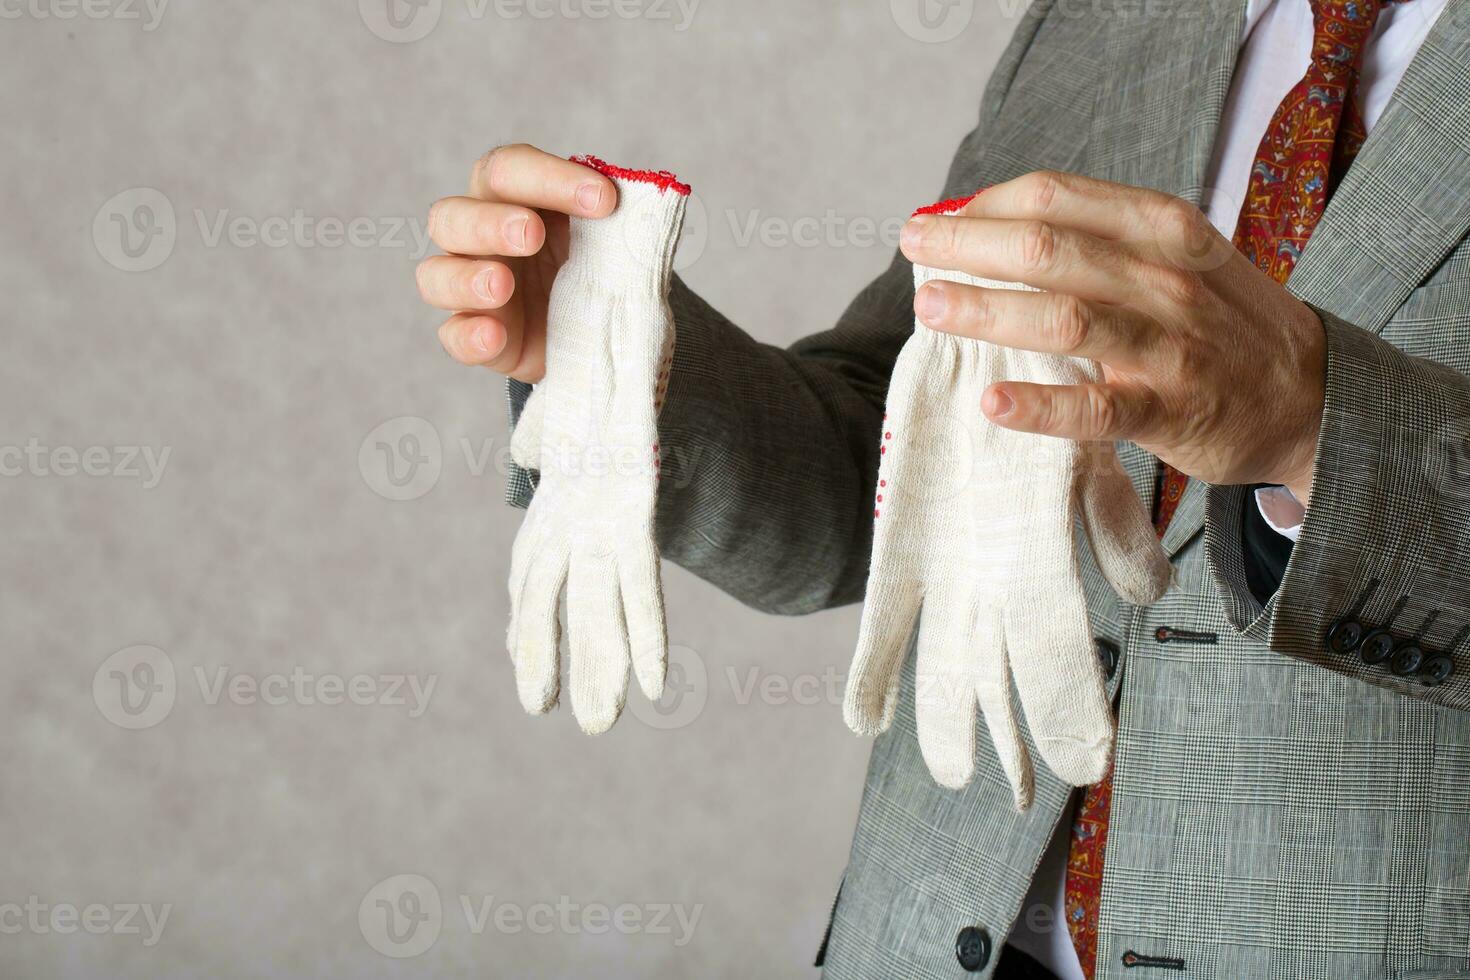 Gardening gloves in the hands of a man photo